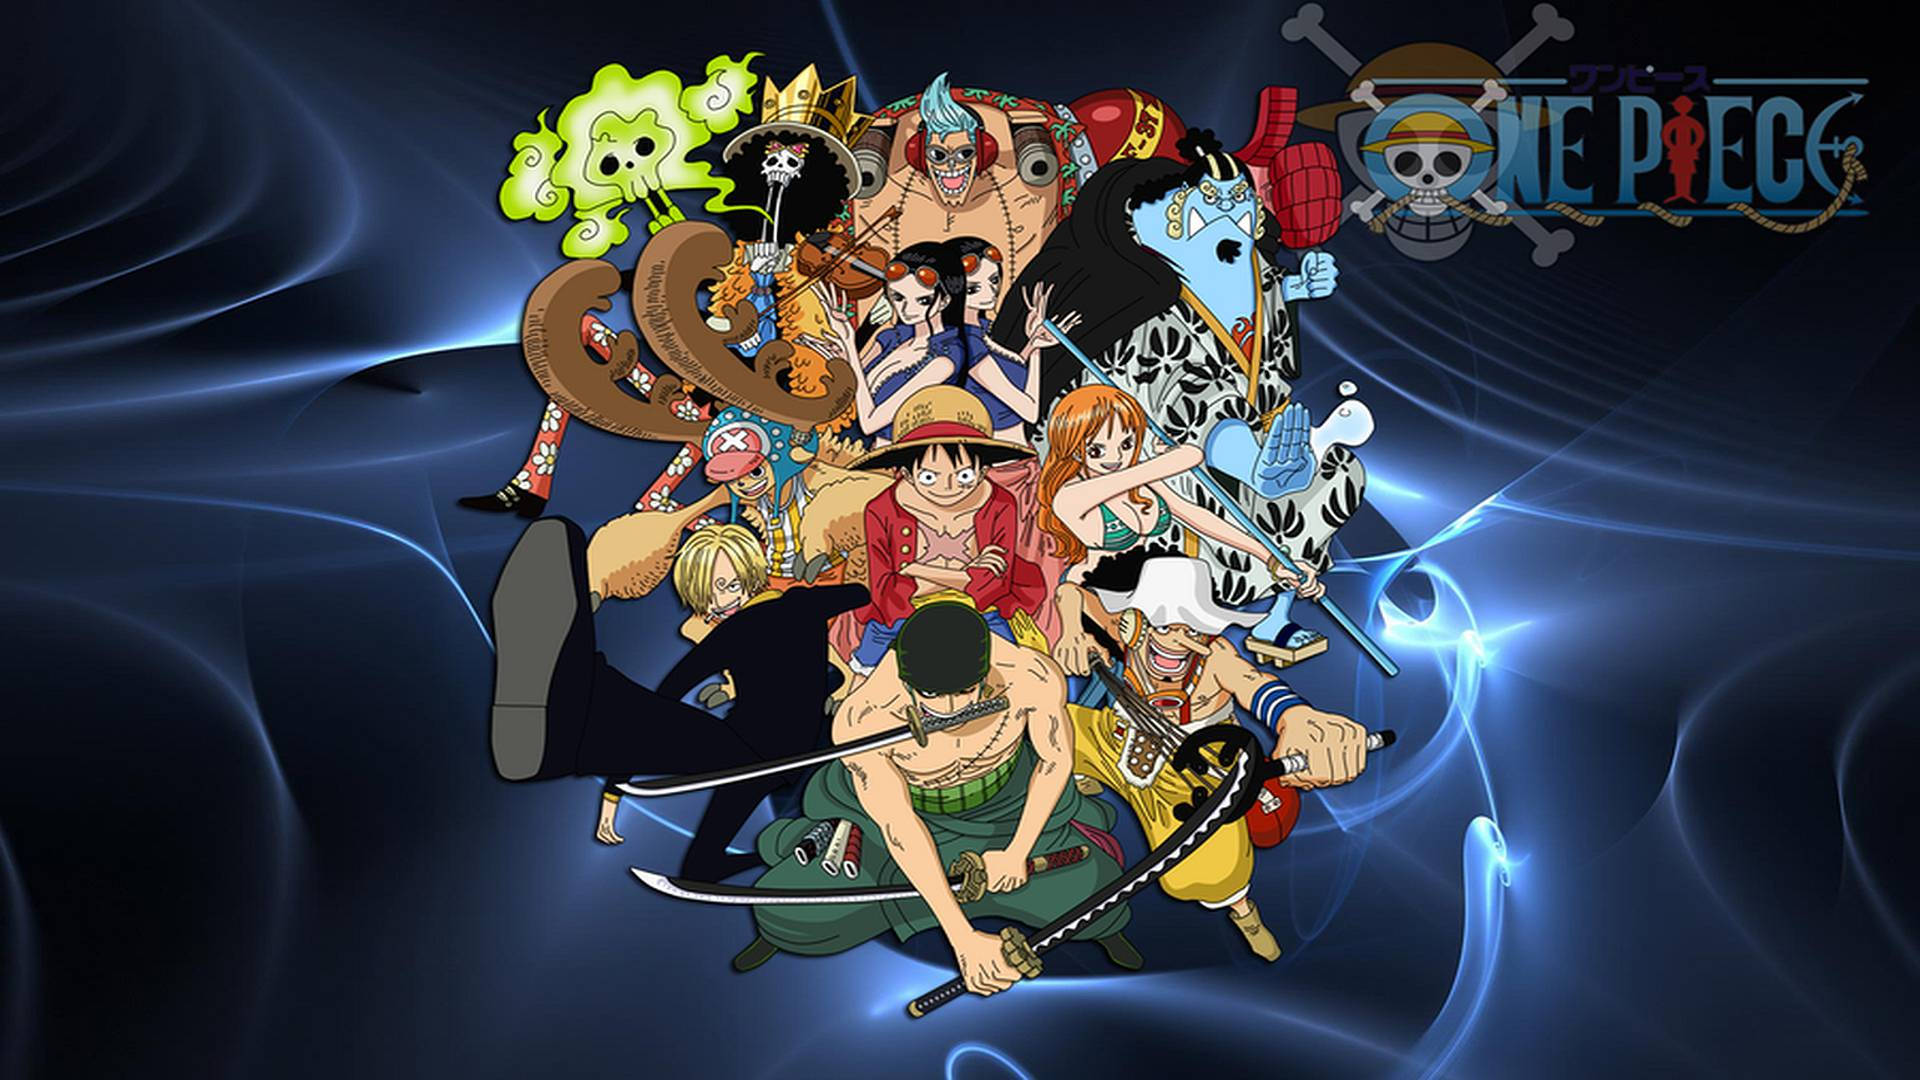 One Piece wallpaper of Luffy and Straw Hat pirates in neon light effects.